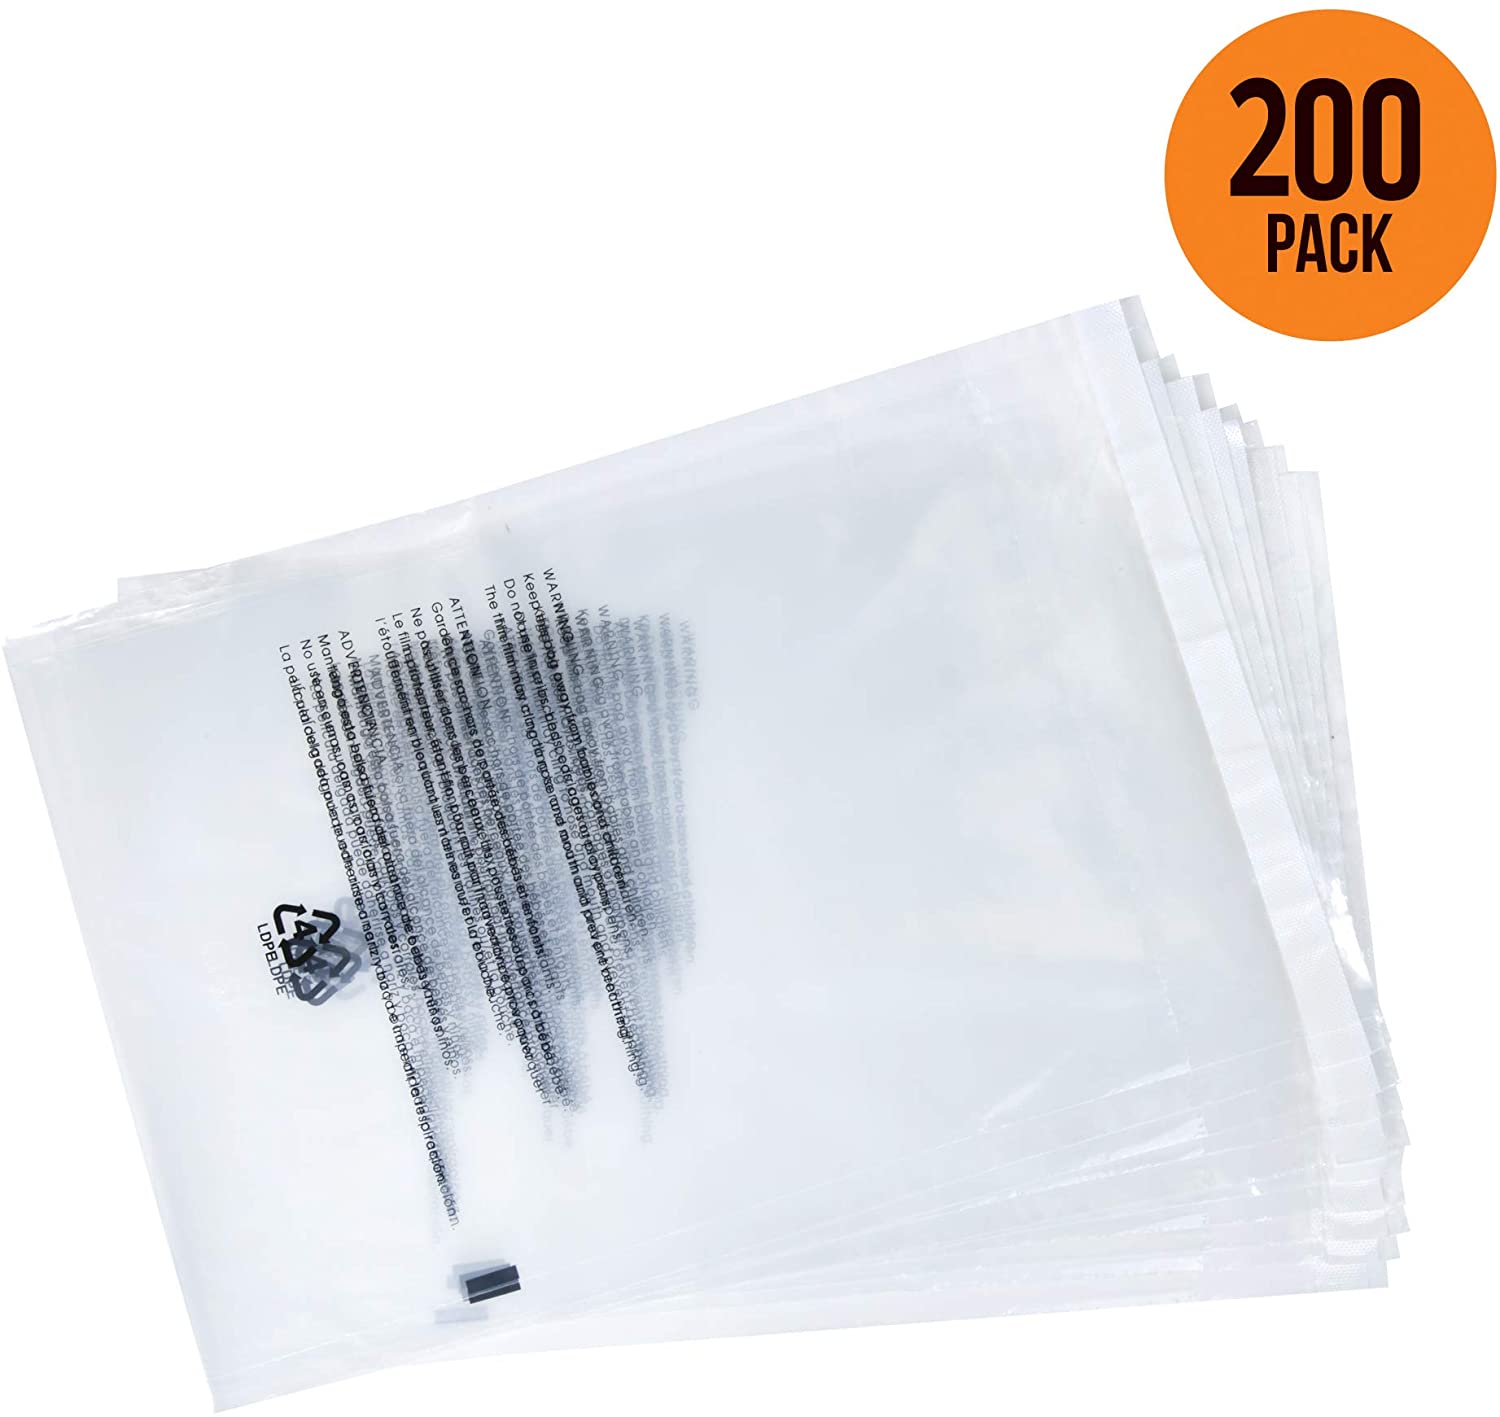 suffocation warning bag pack of 200